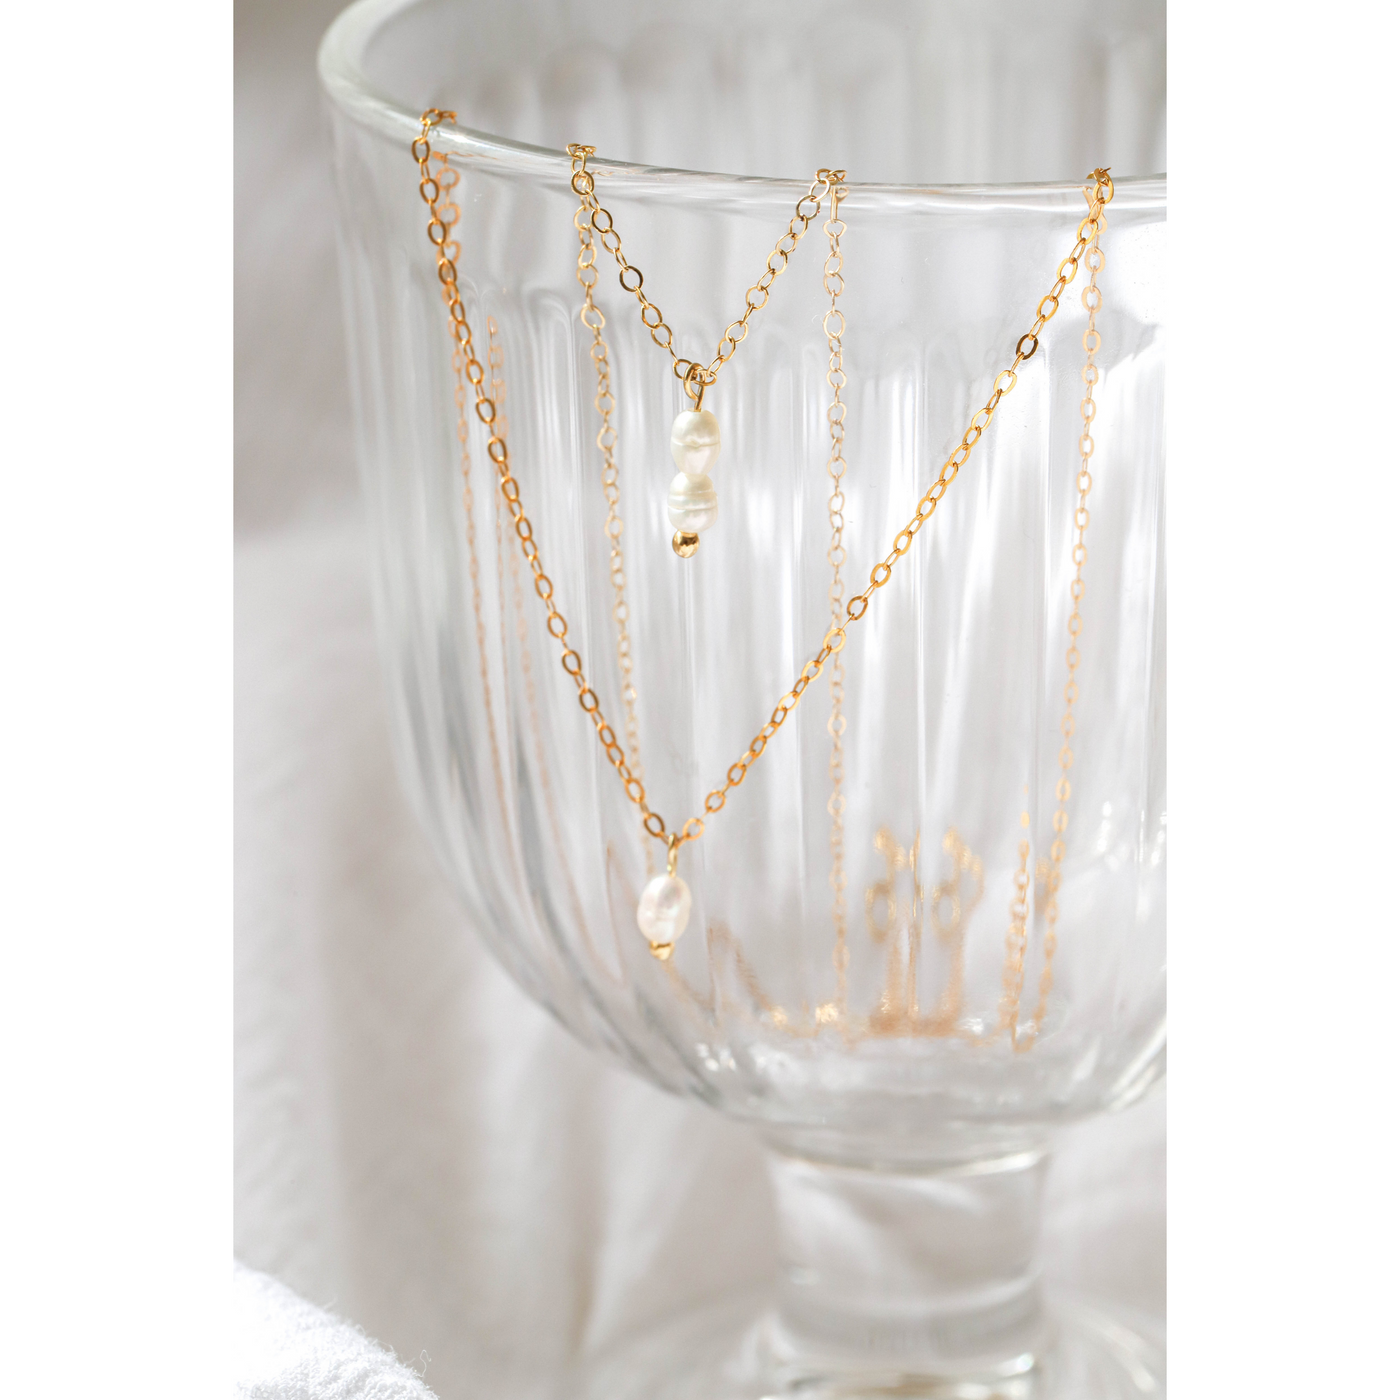 Gold necklace with pearl charms